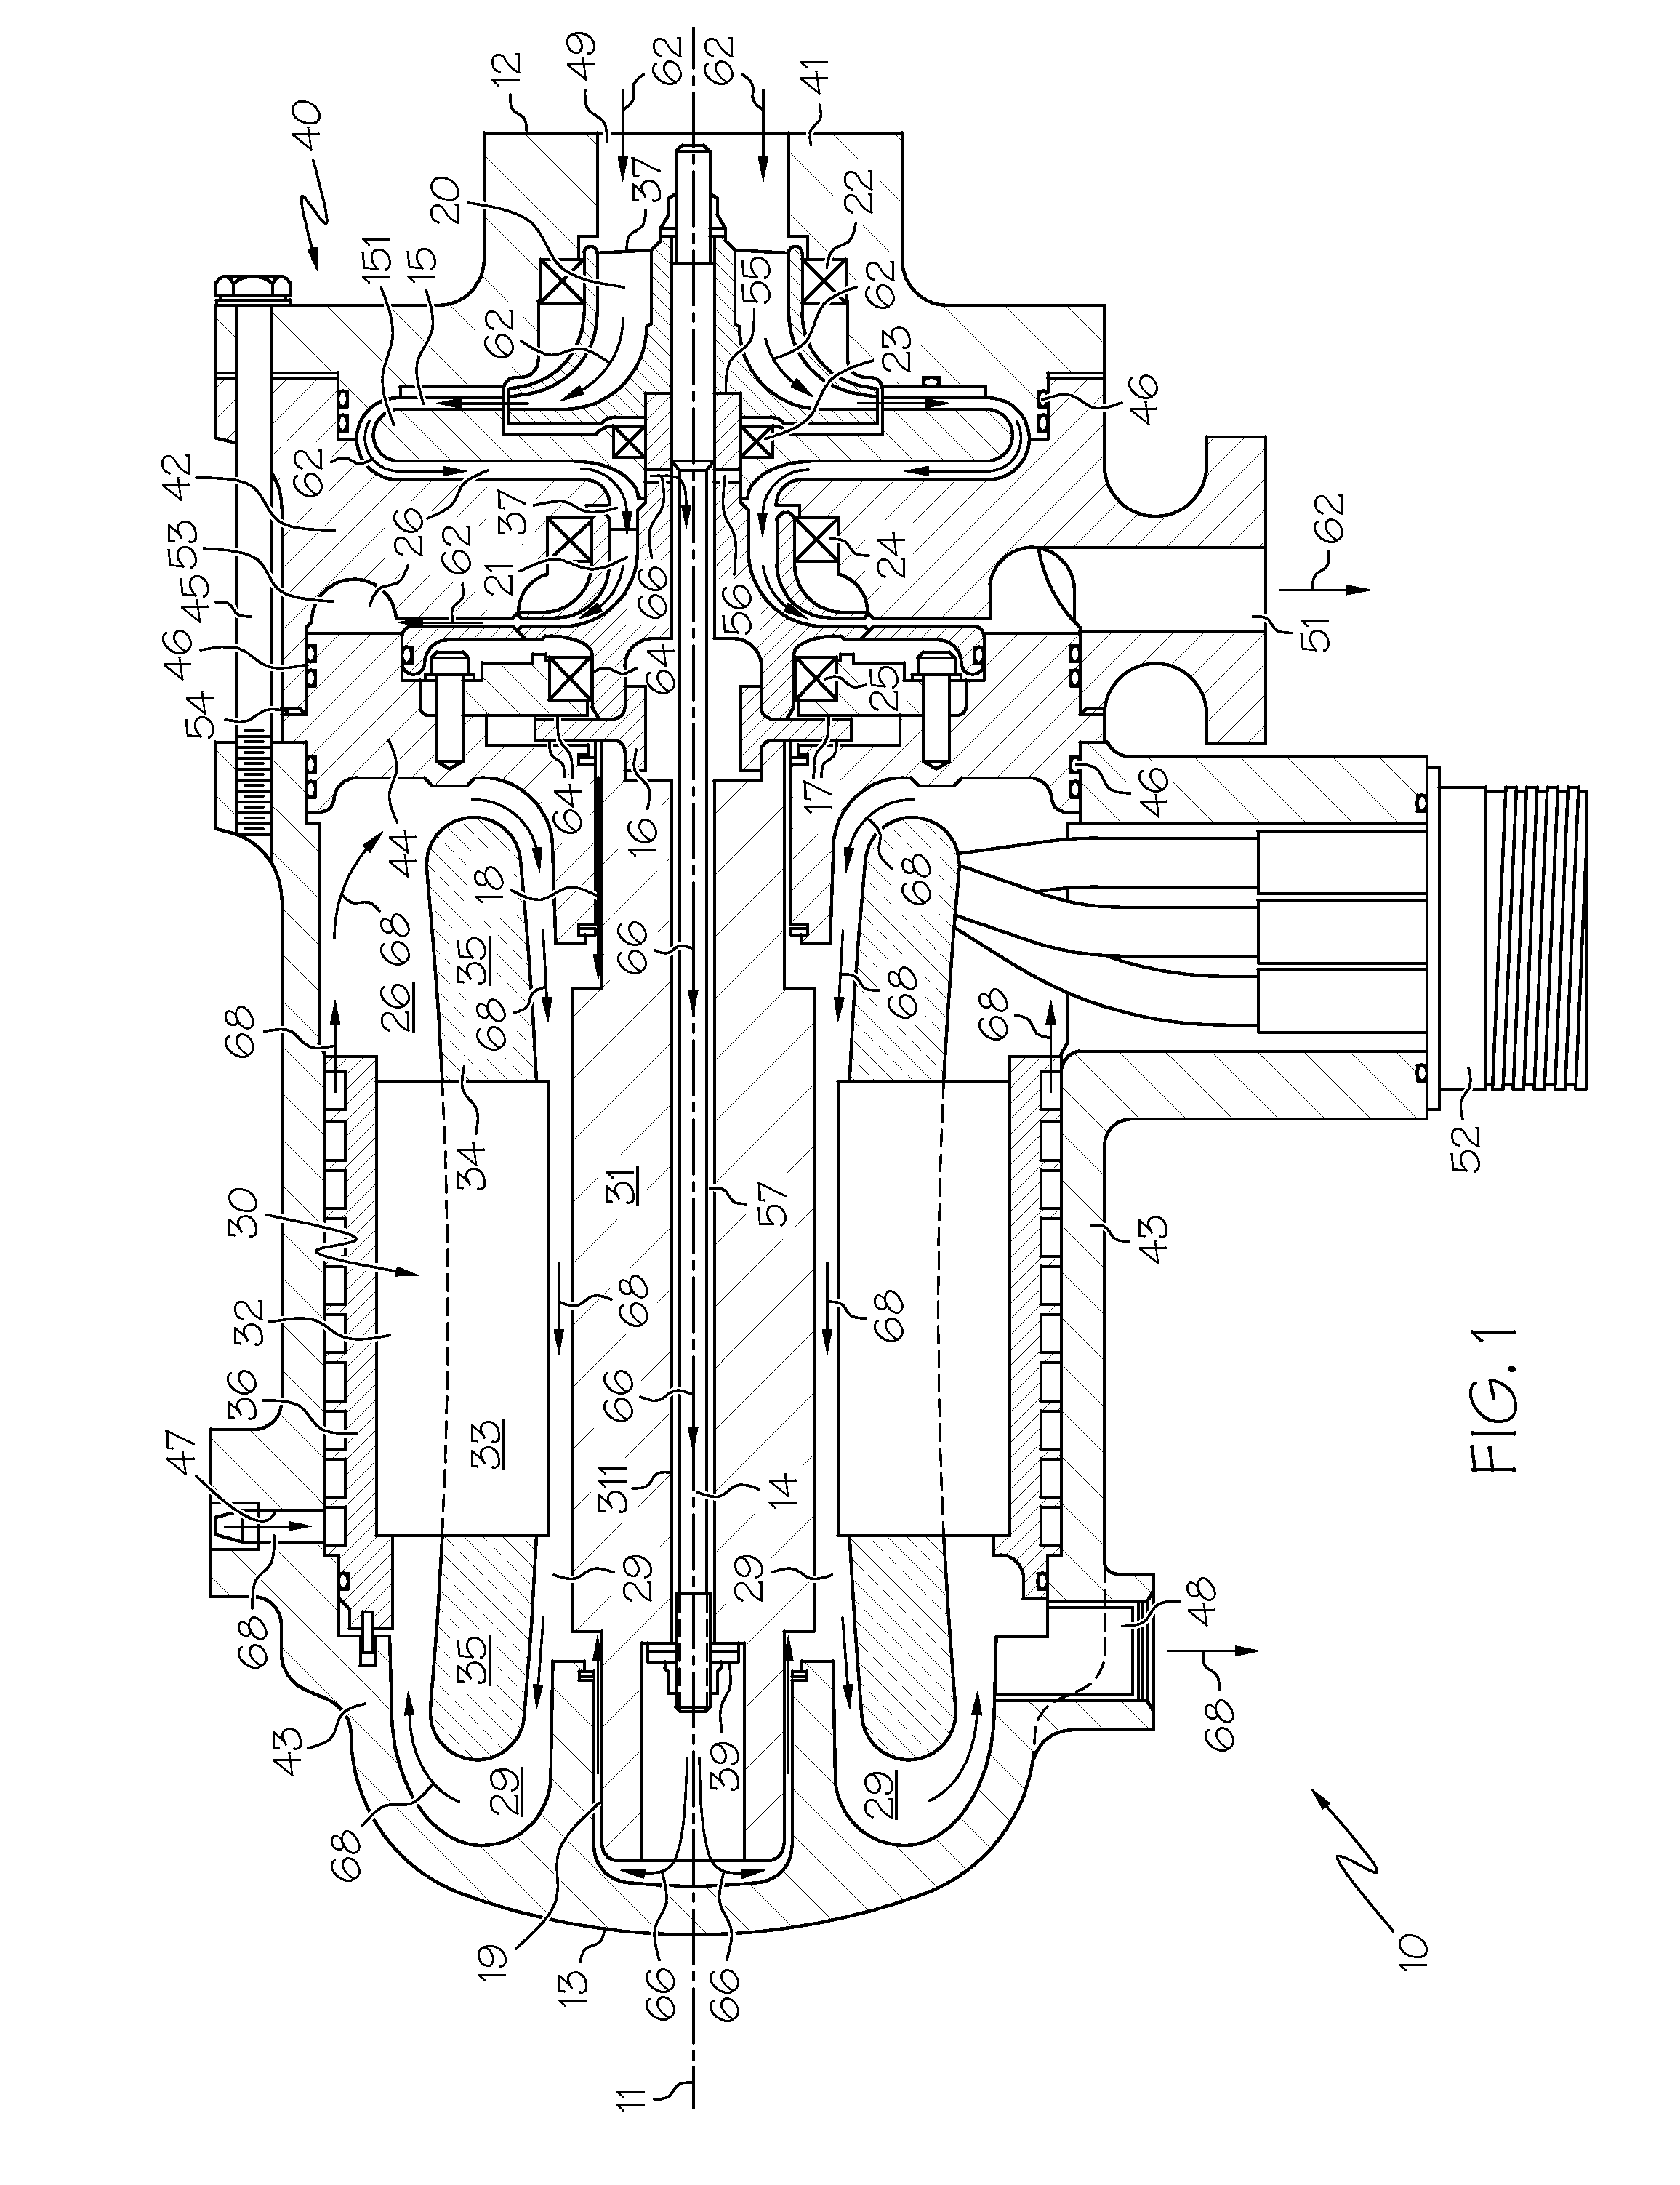 Two-stage vapor cycle compressor